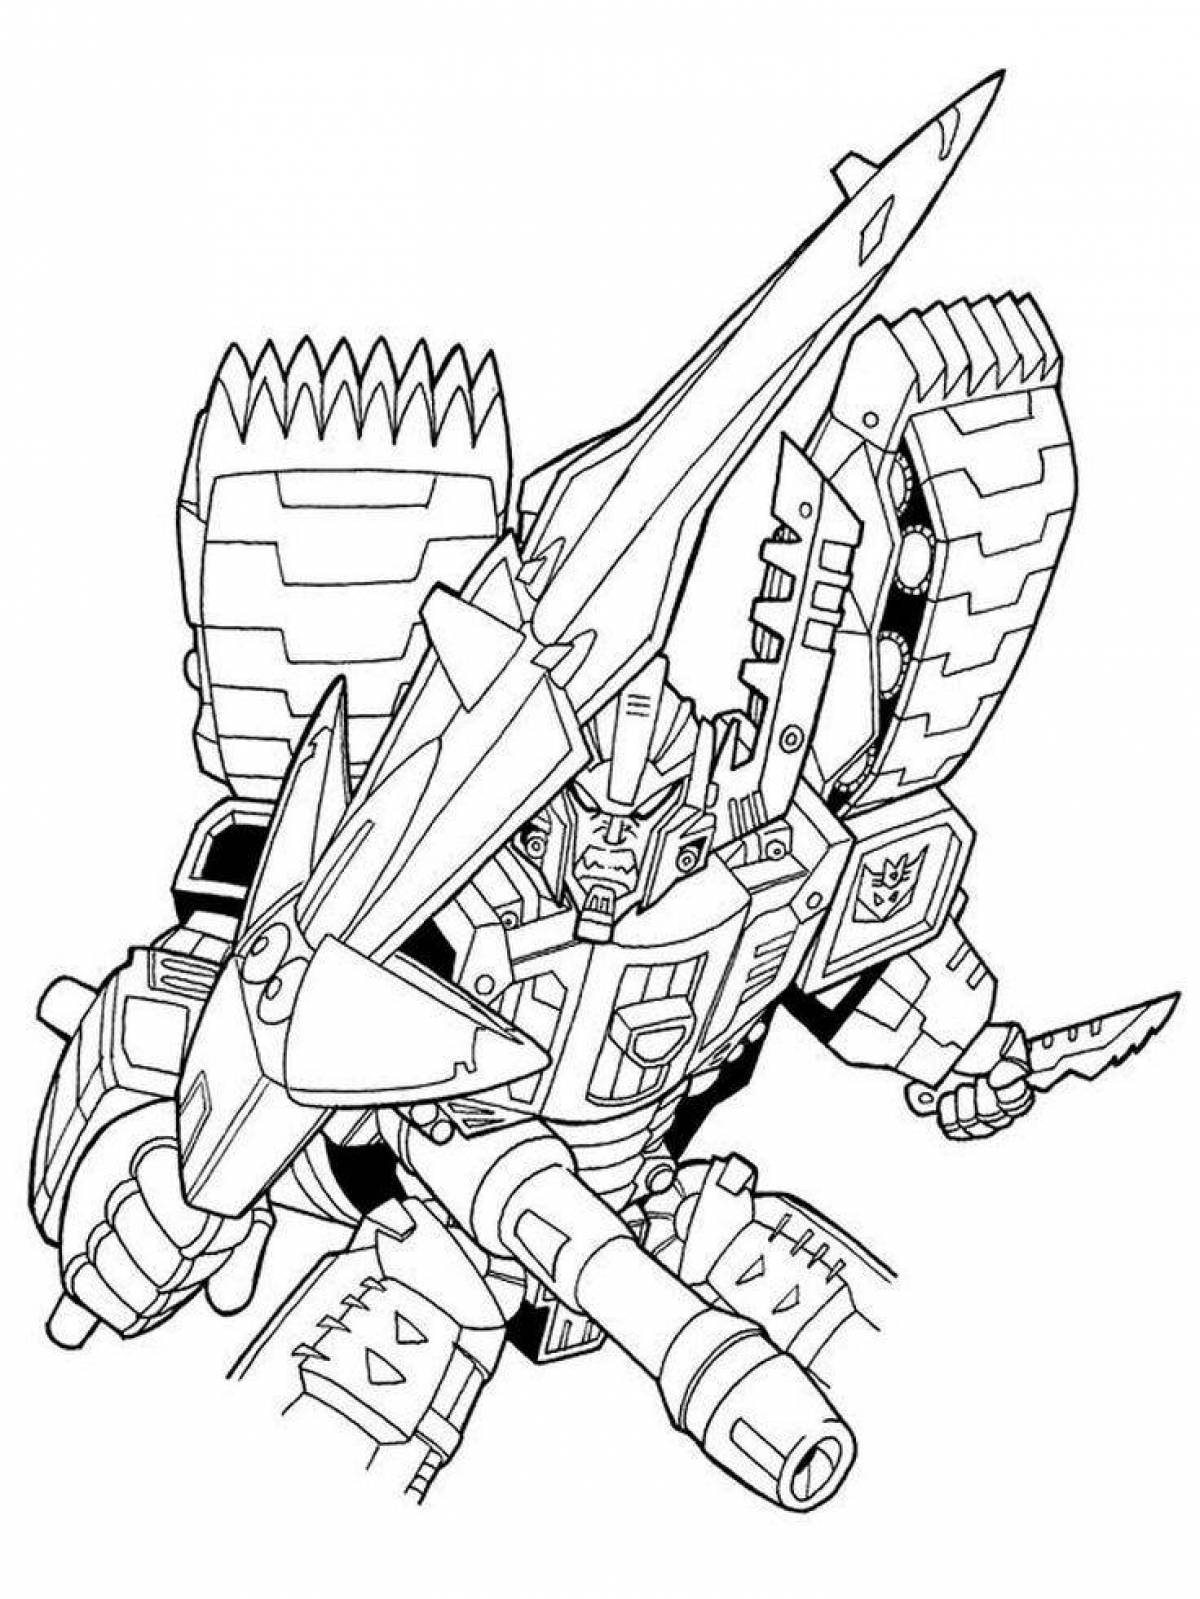 Gorgeous decepticons coloring page